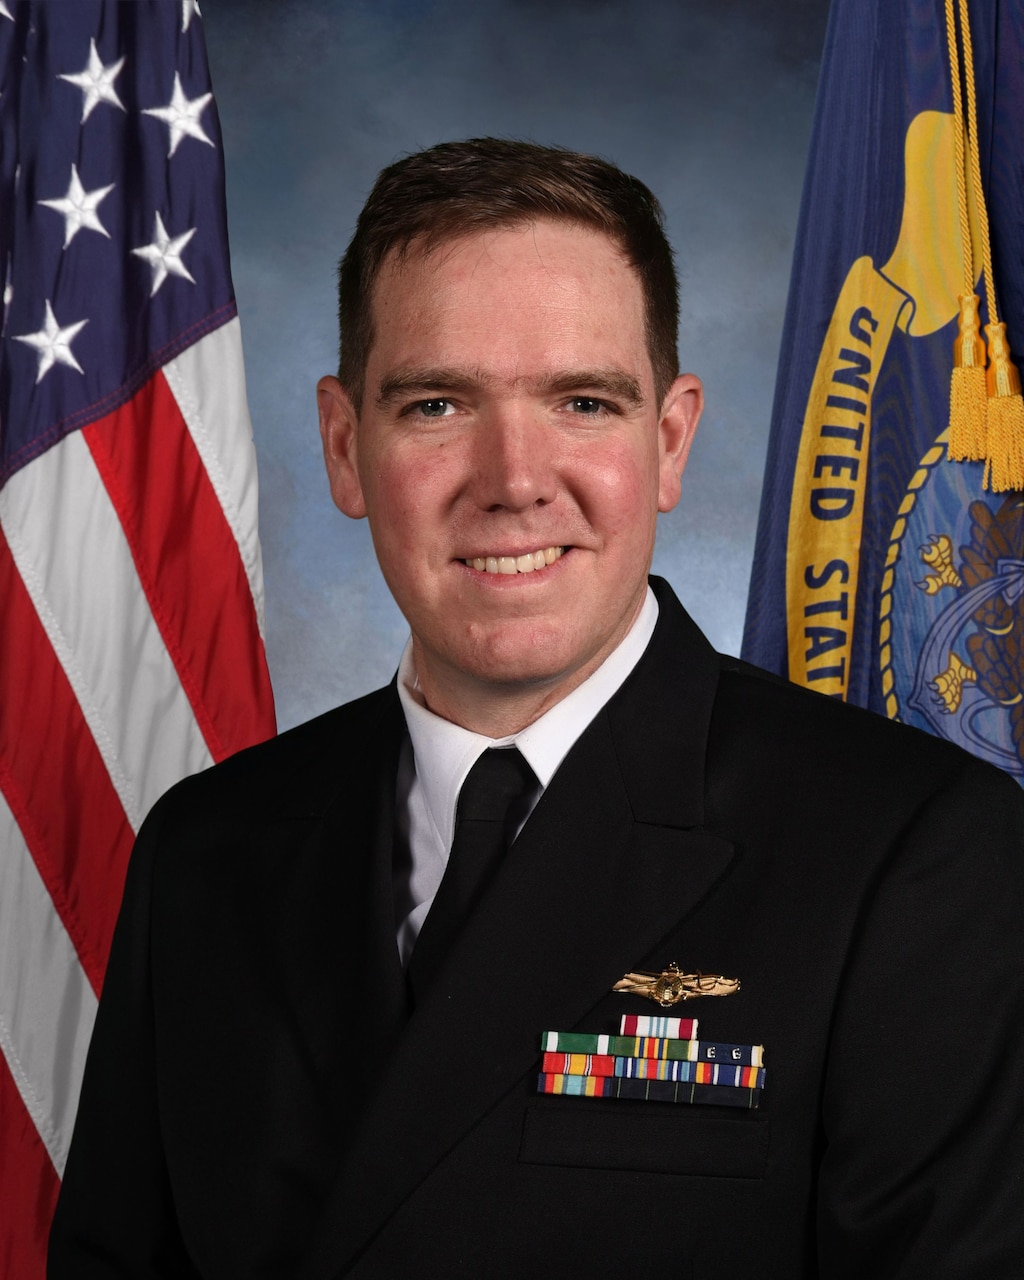 Lt. Cmdr. H. T. Haskell, Executive Officer, Naval Computer & Telecommunications Station Hampton Roads (NCTS HR)